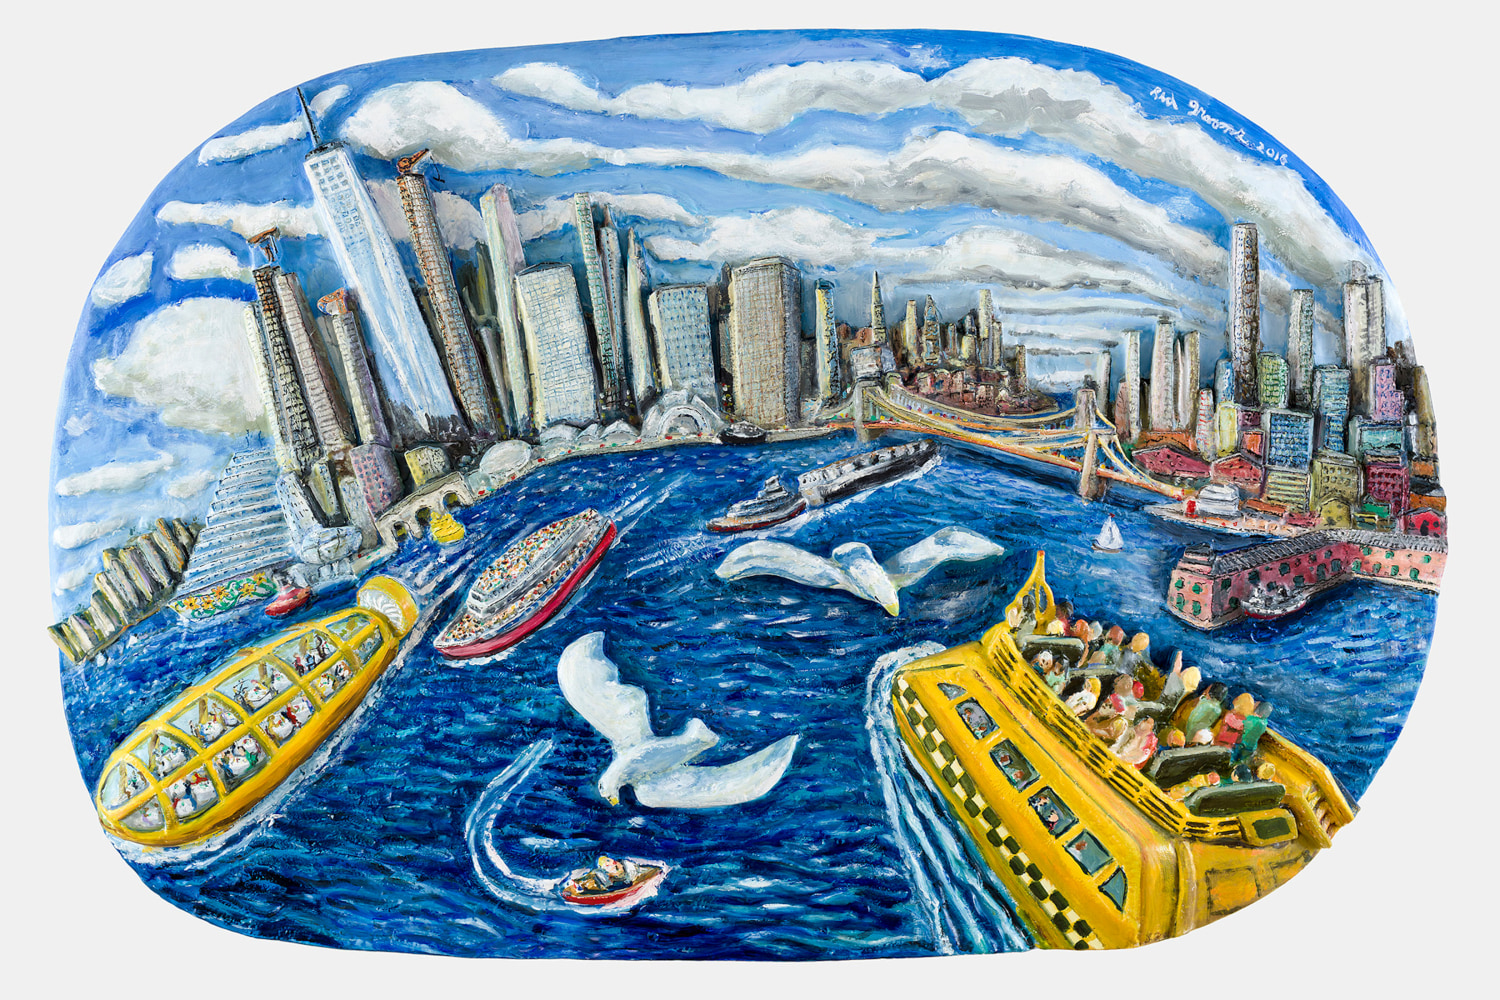 Acrylic, ink and epoxy mounted on wood artwork by Red Grooms of the New York Harbor with people on yellow boats and seagulls flying